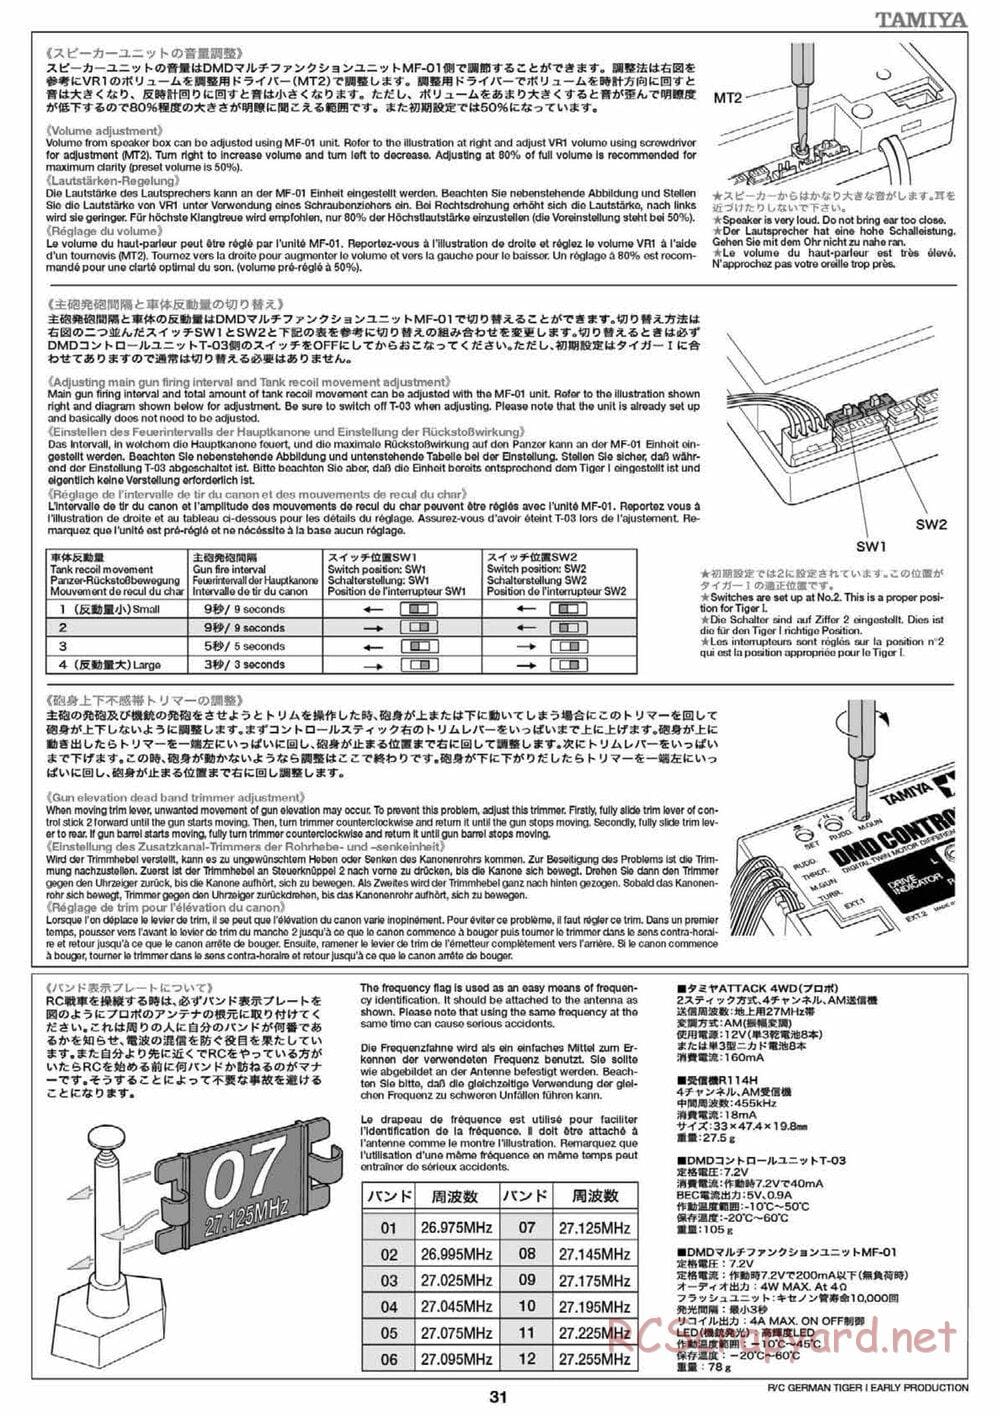 Tamiya - Tiger I Early Production - 1/16 Scale Chassis - Manual - Page 31